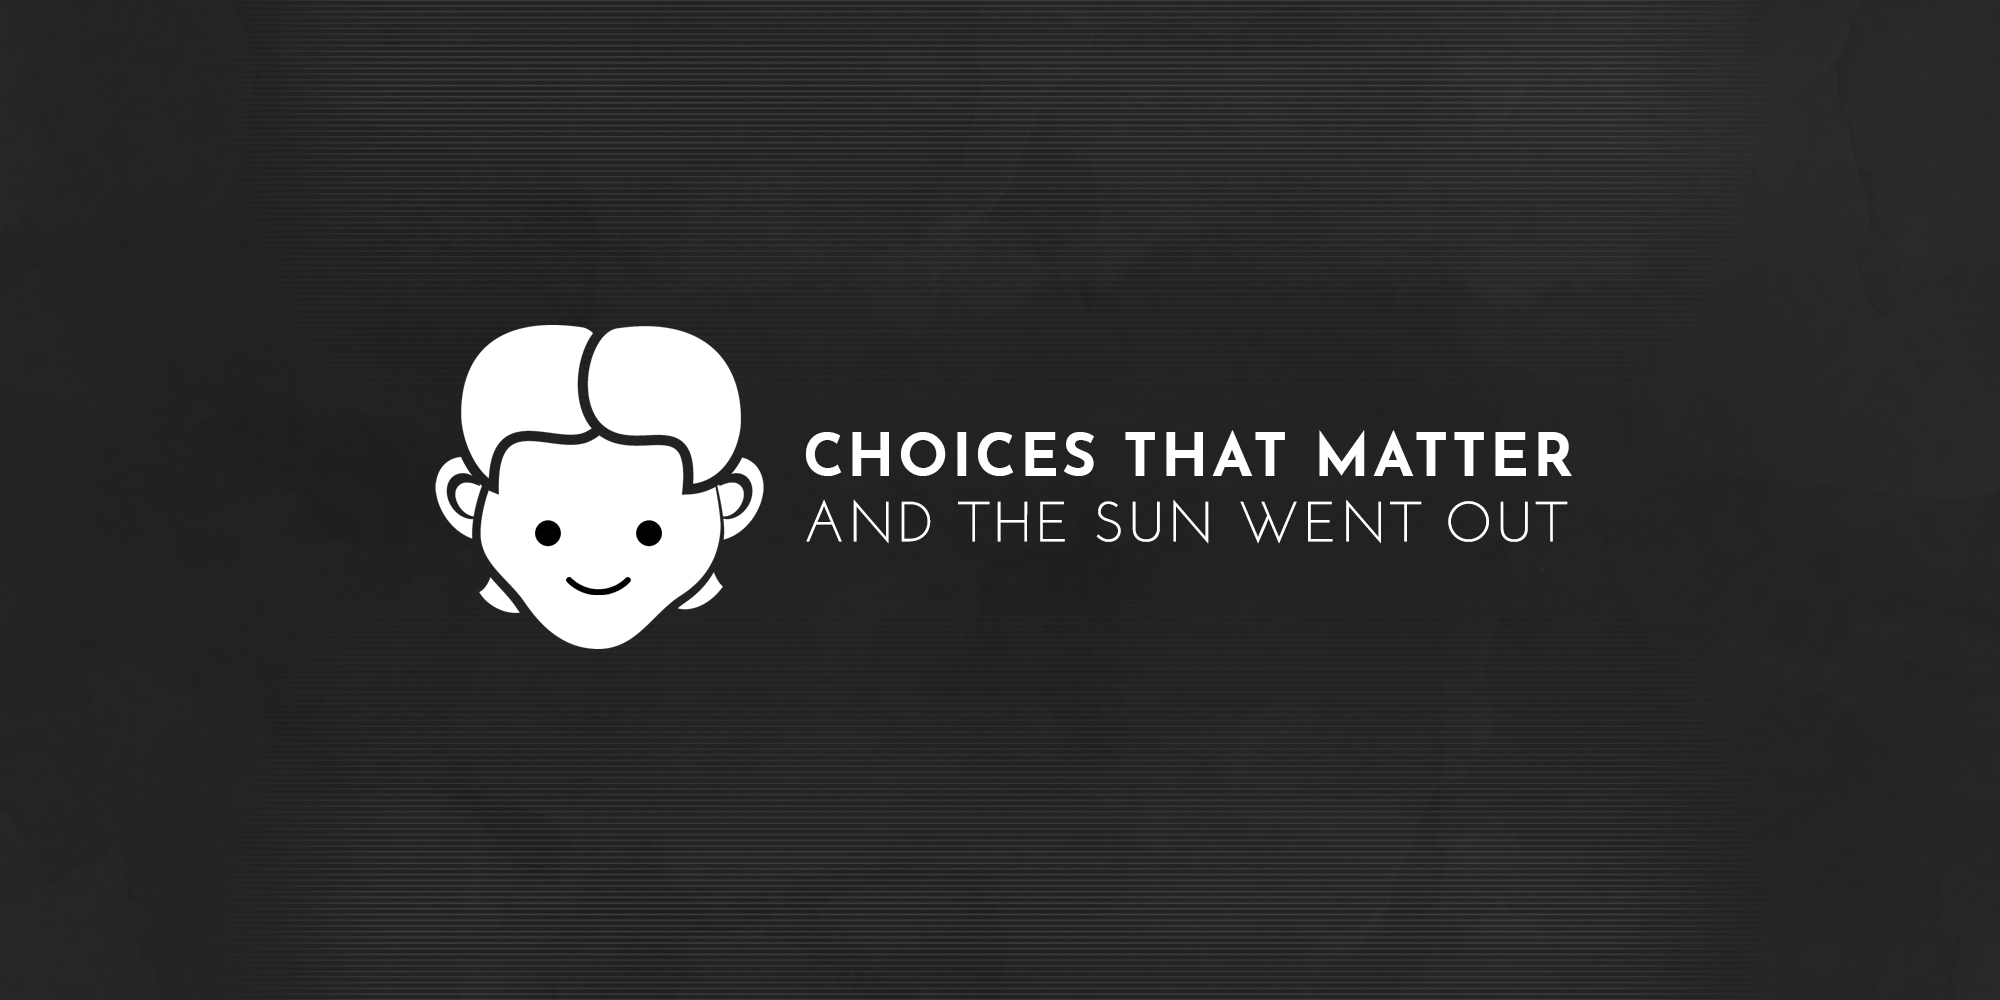 Choice matter. Choices that matter. Sun goes out.